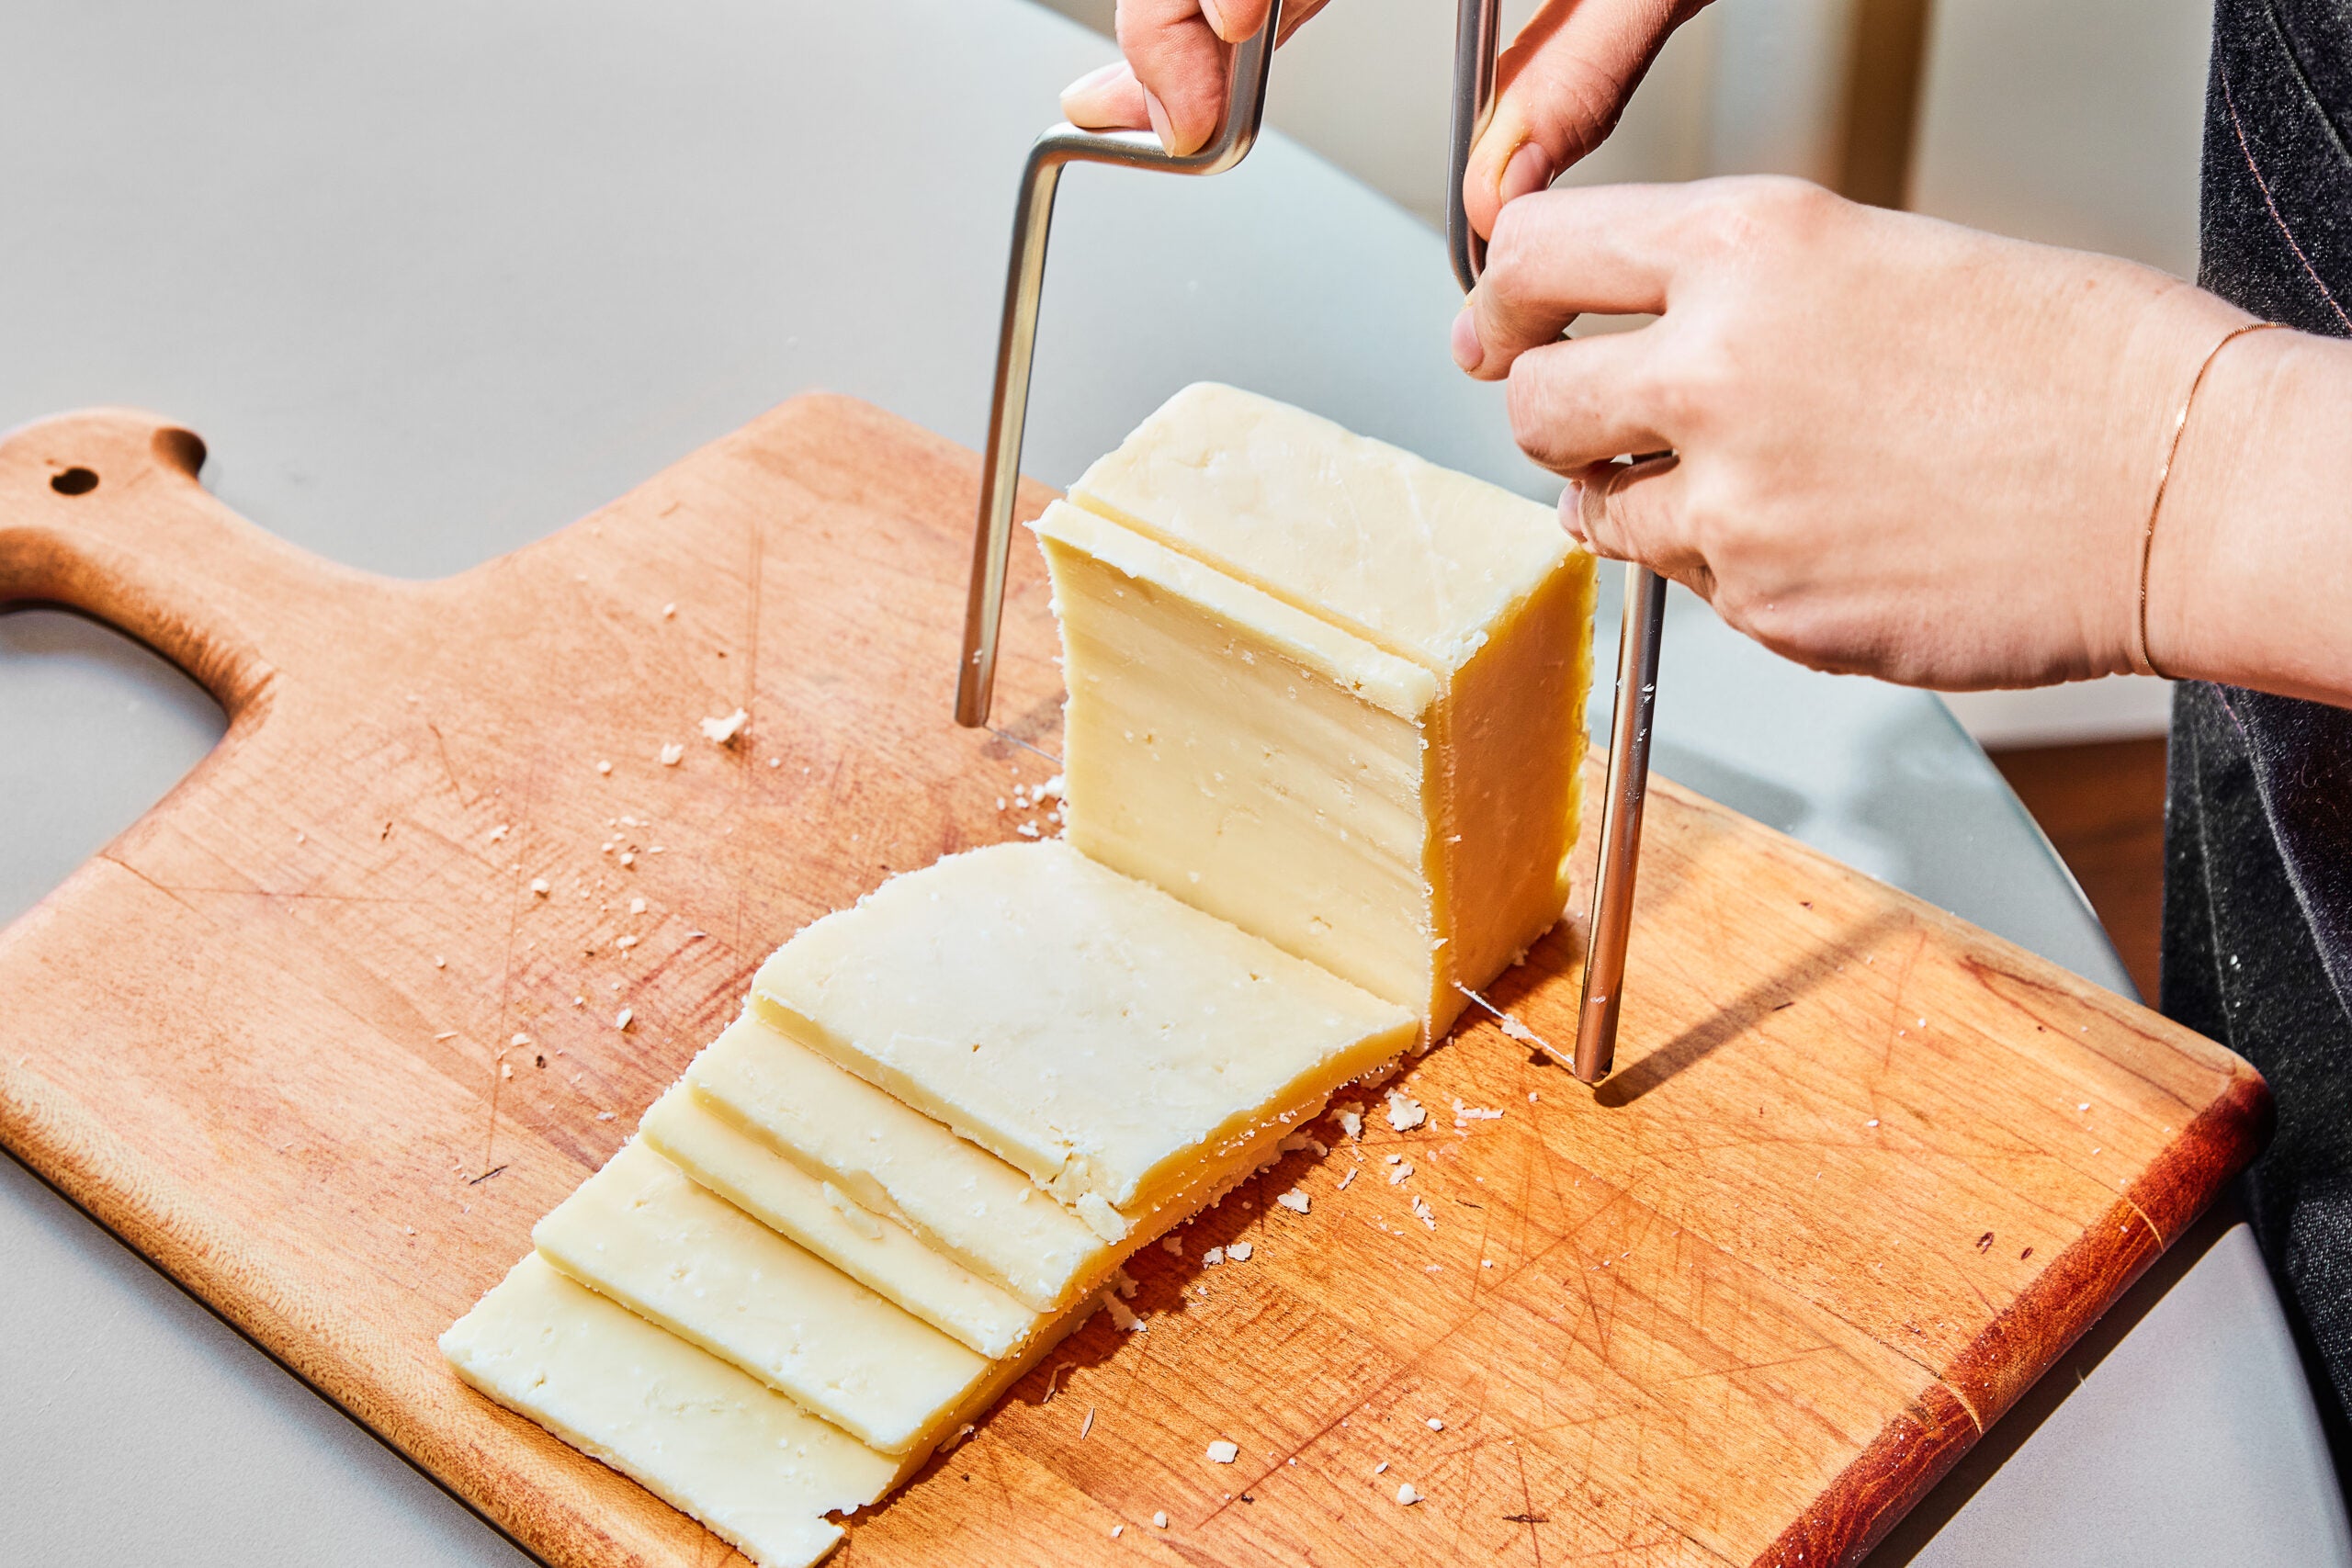 https://www.saveur.com/uploads/2022/12/22/How-To-Cut-Cheese-Saveur-12-scaled.jpg